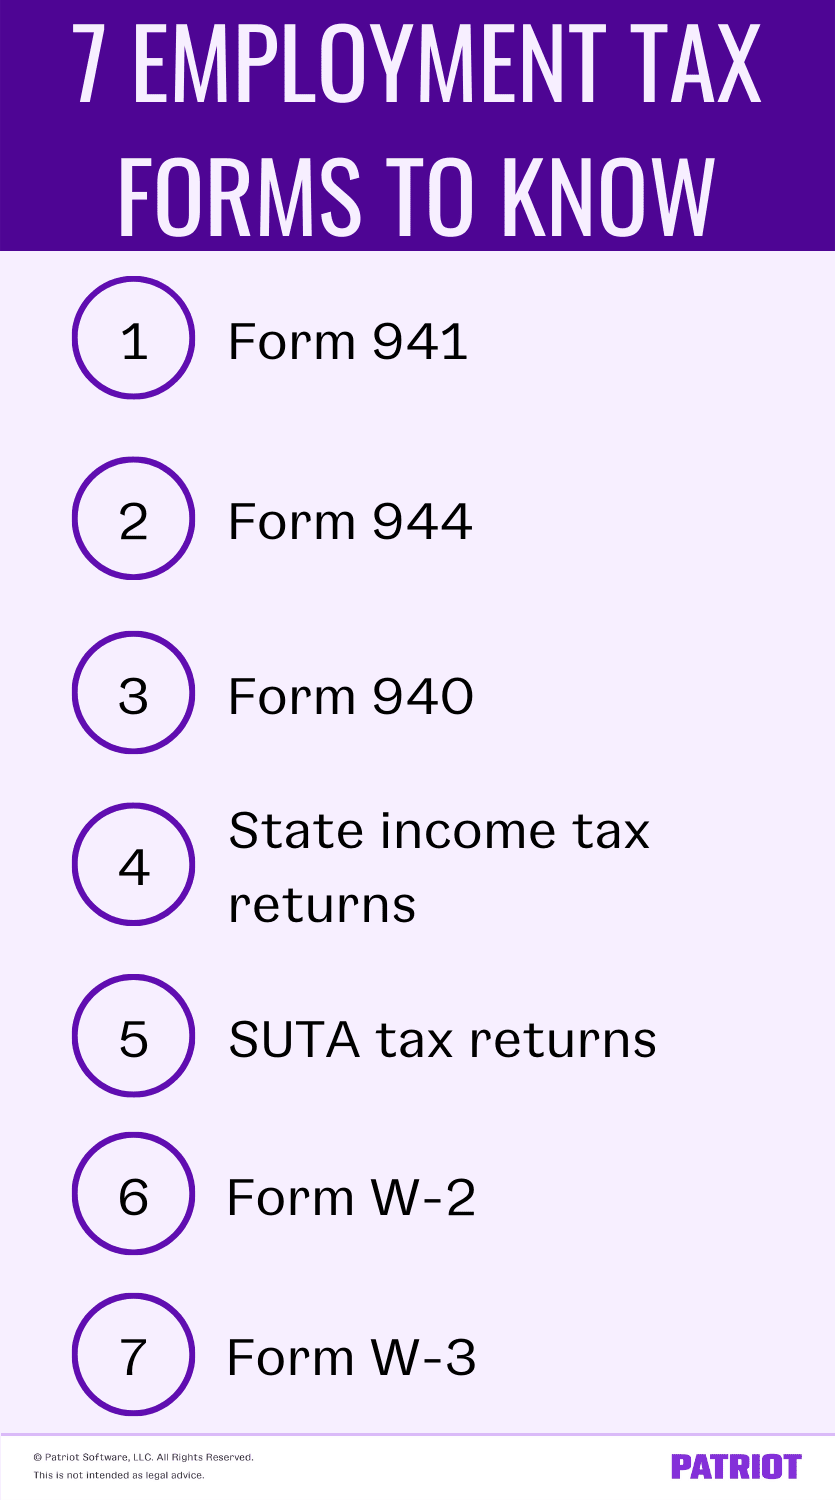 Seven employment tax forms to know include Form 941, Form 944, Form 940, state income tax returns, SUTA tax returns, Form W-2, and Form W-3. 